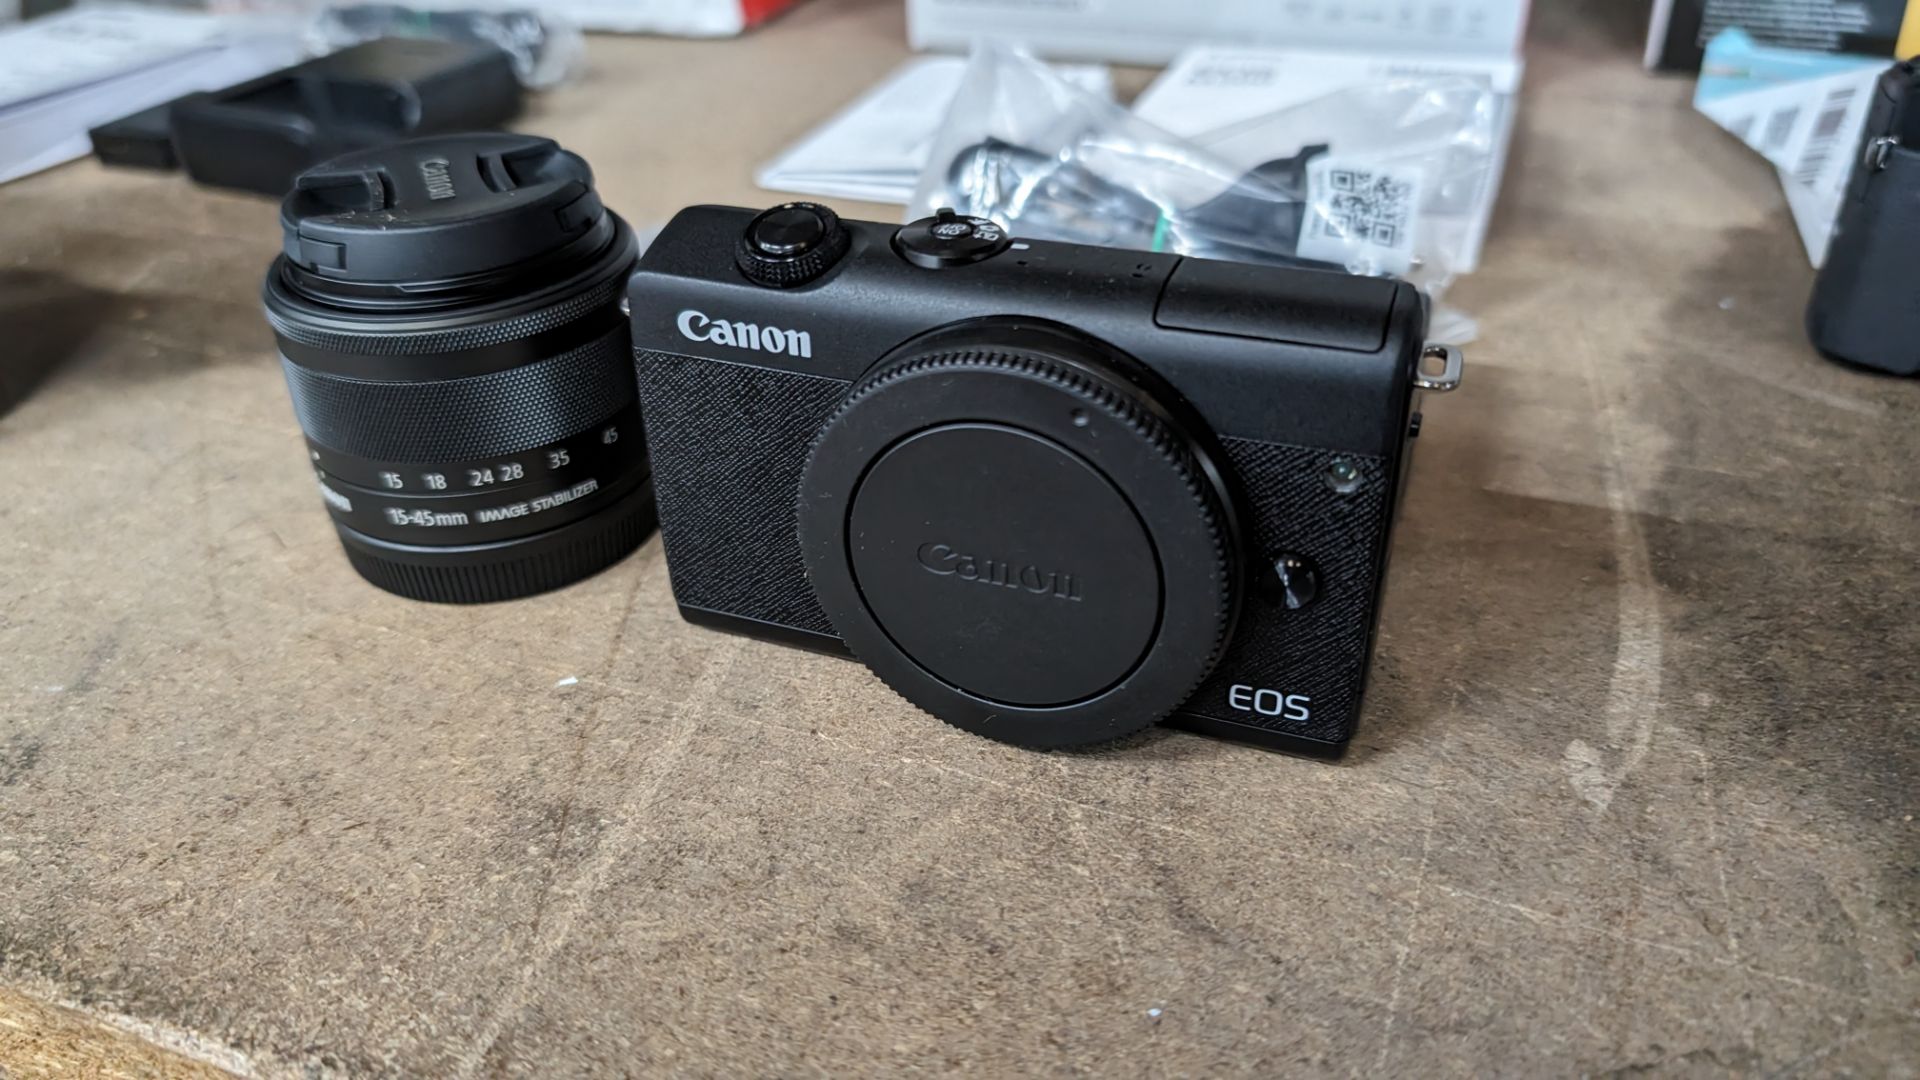 Canon EOS M200 camera kit, including 15-45mm image stabilizer lens, plus battery and charger - Bild 5 aus 12